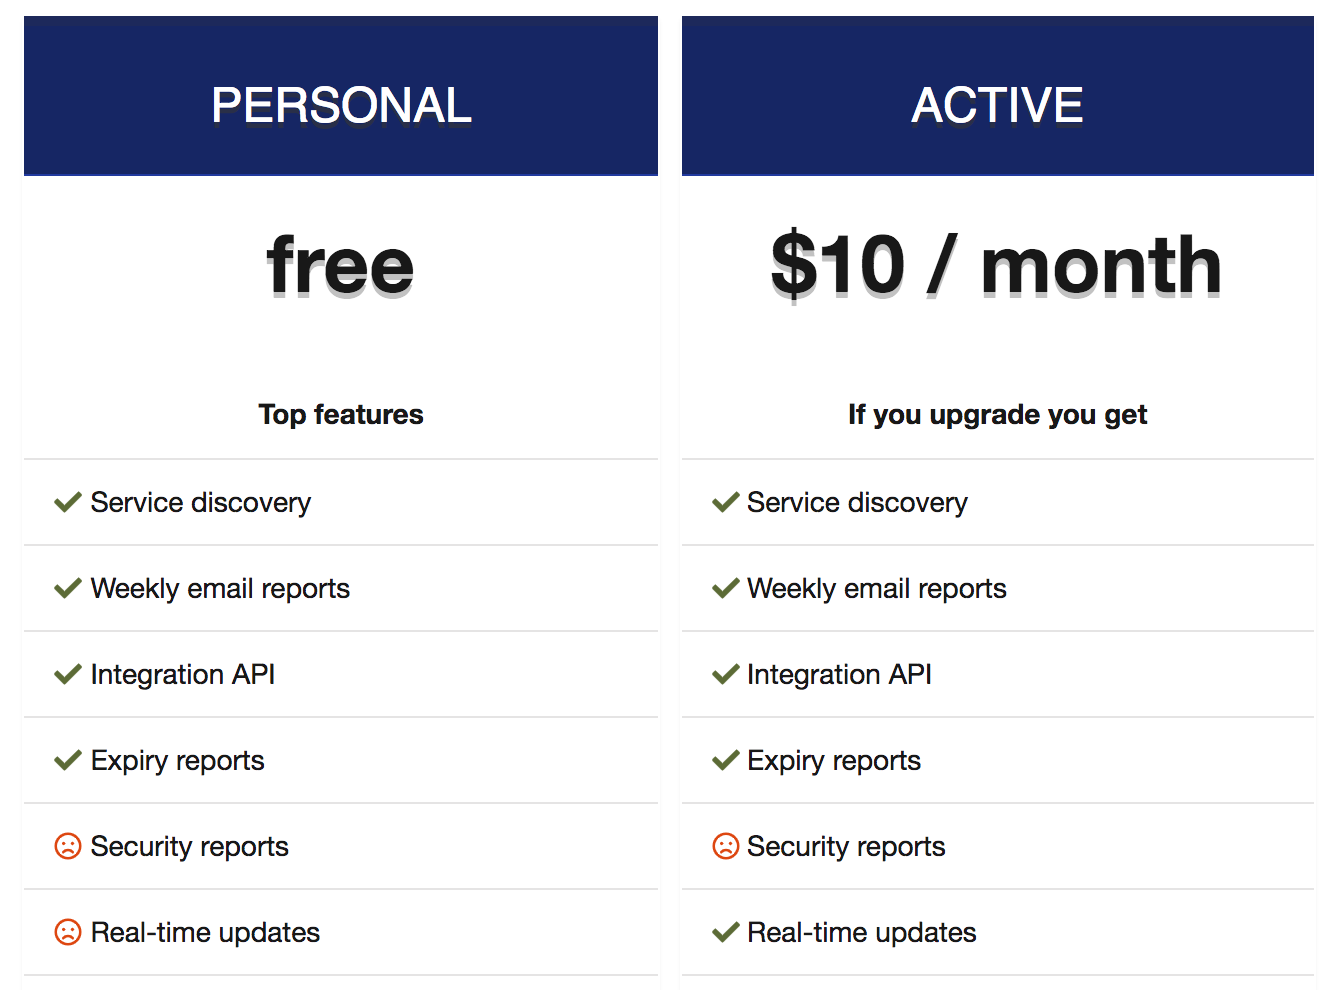 KeyChest Personal is free, Business plans start at $10 / month